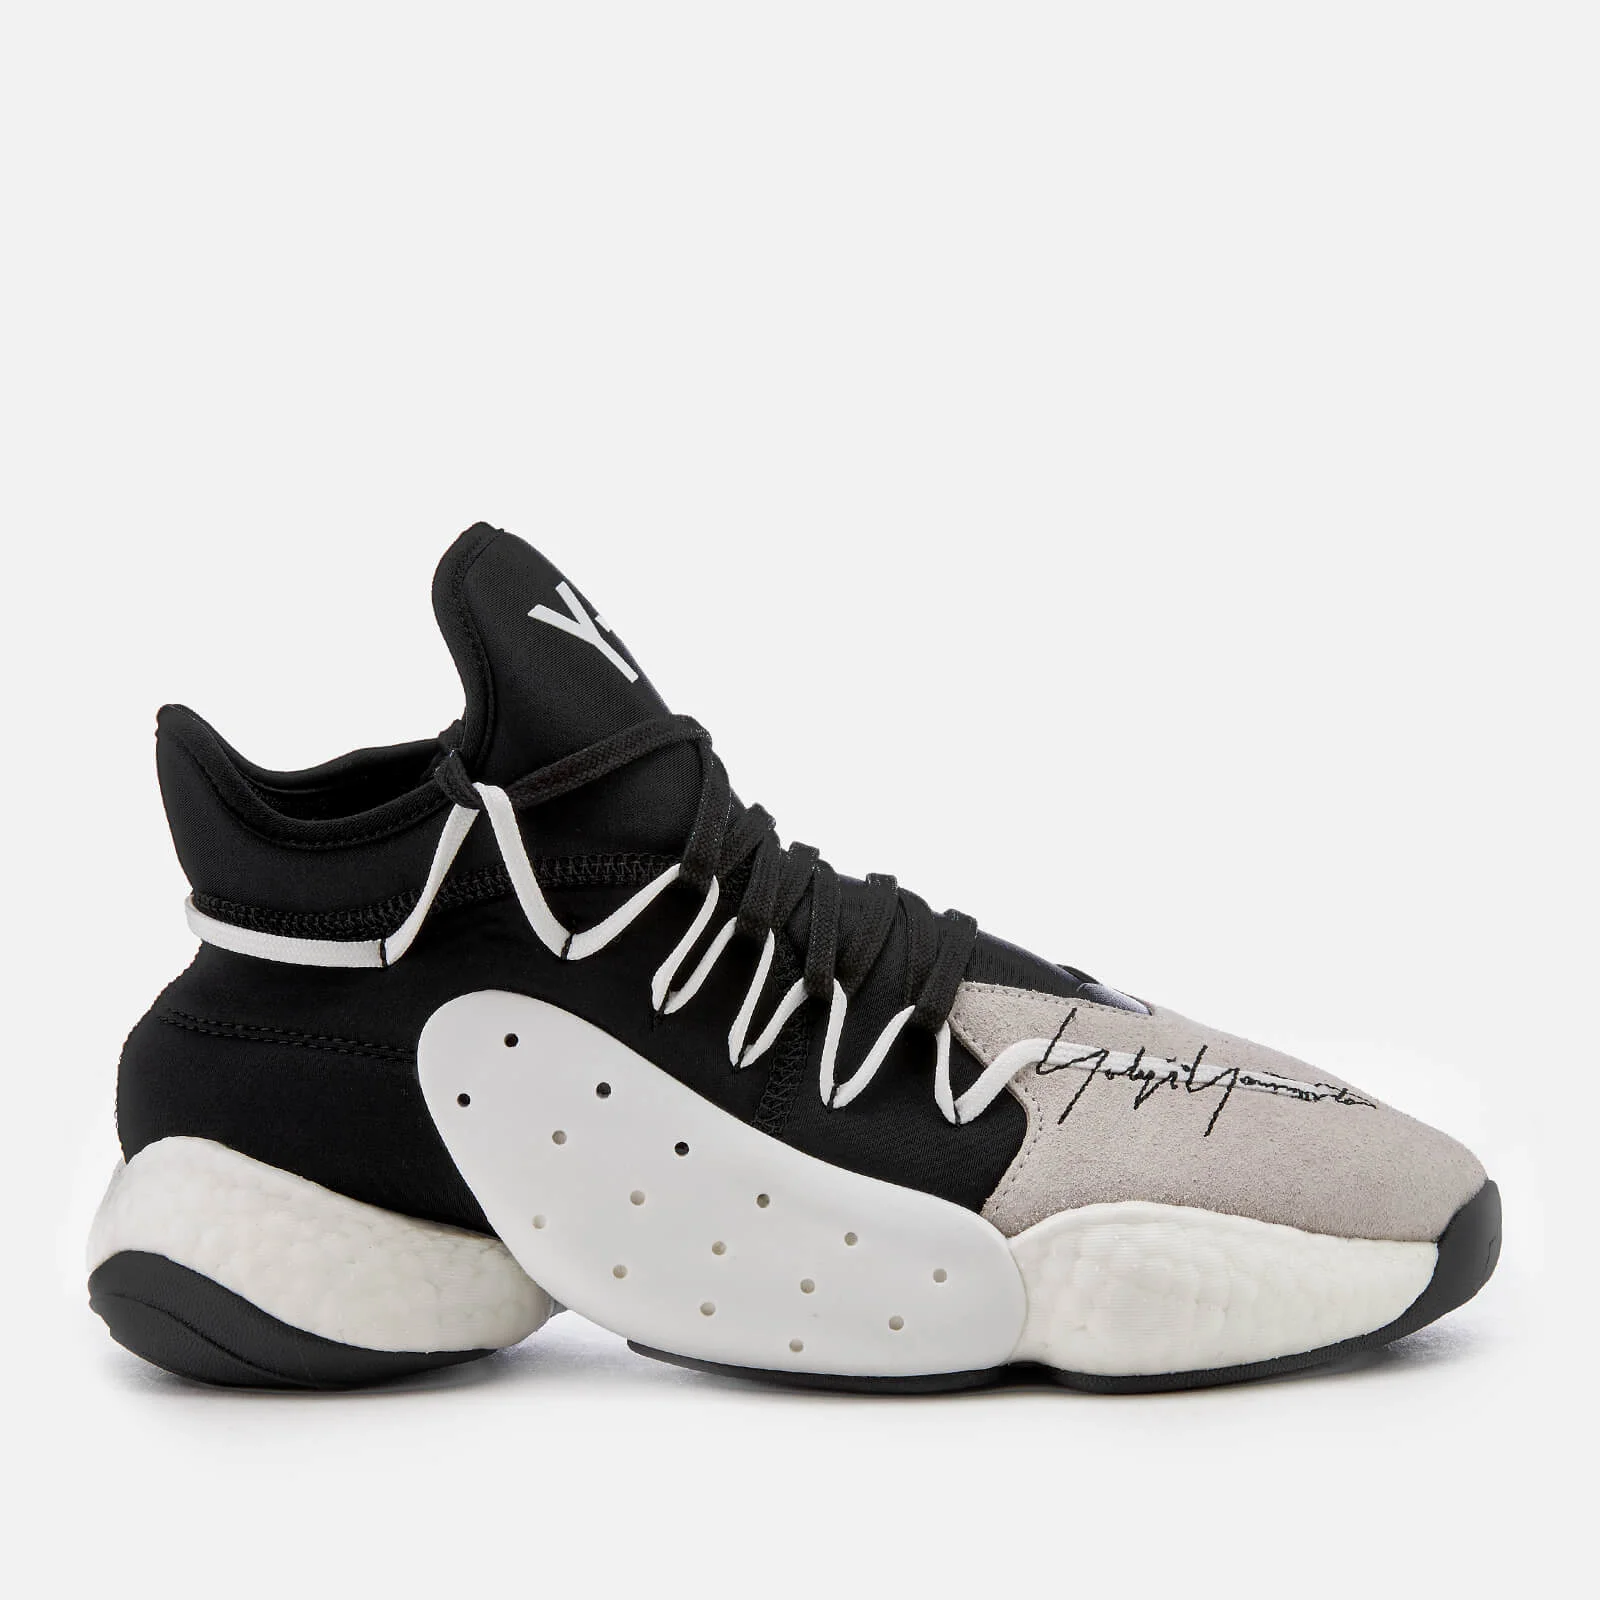 Y-3 Men's BYW B-Ball Trainers - FTWR White Image 1